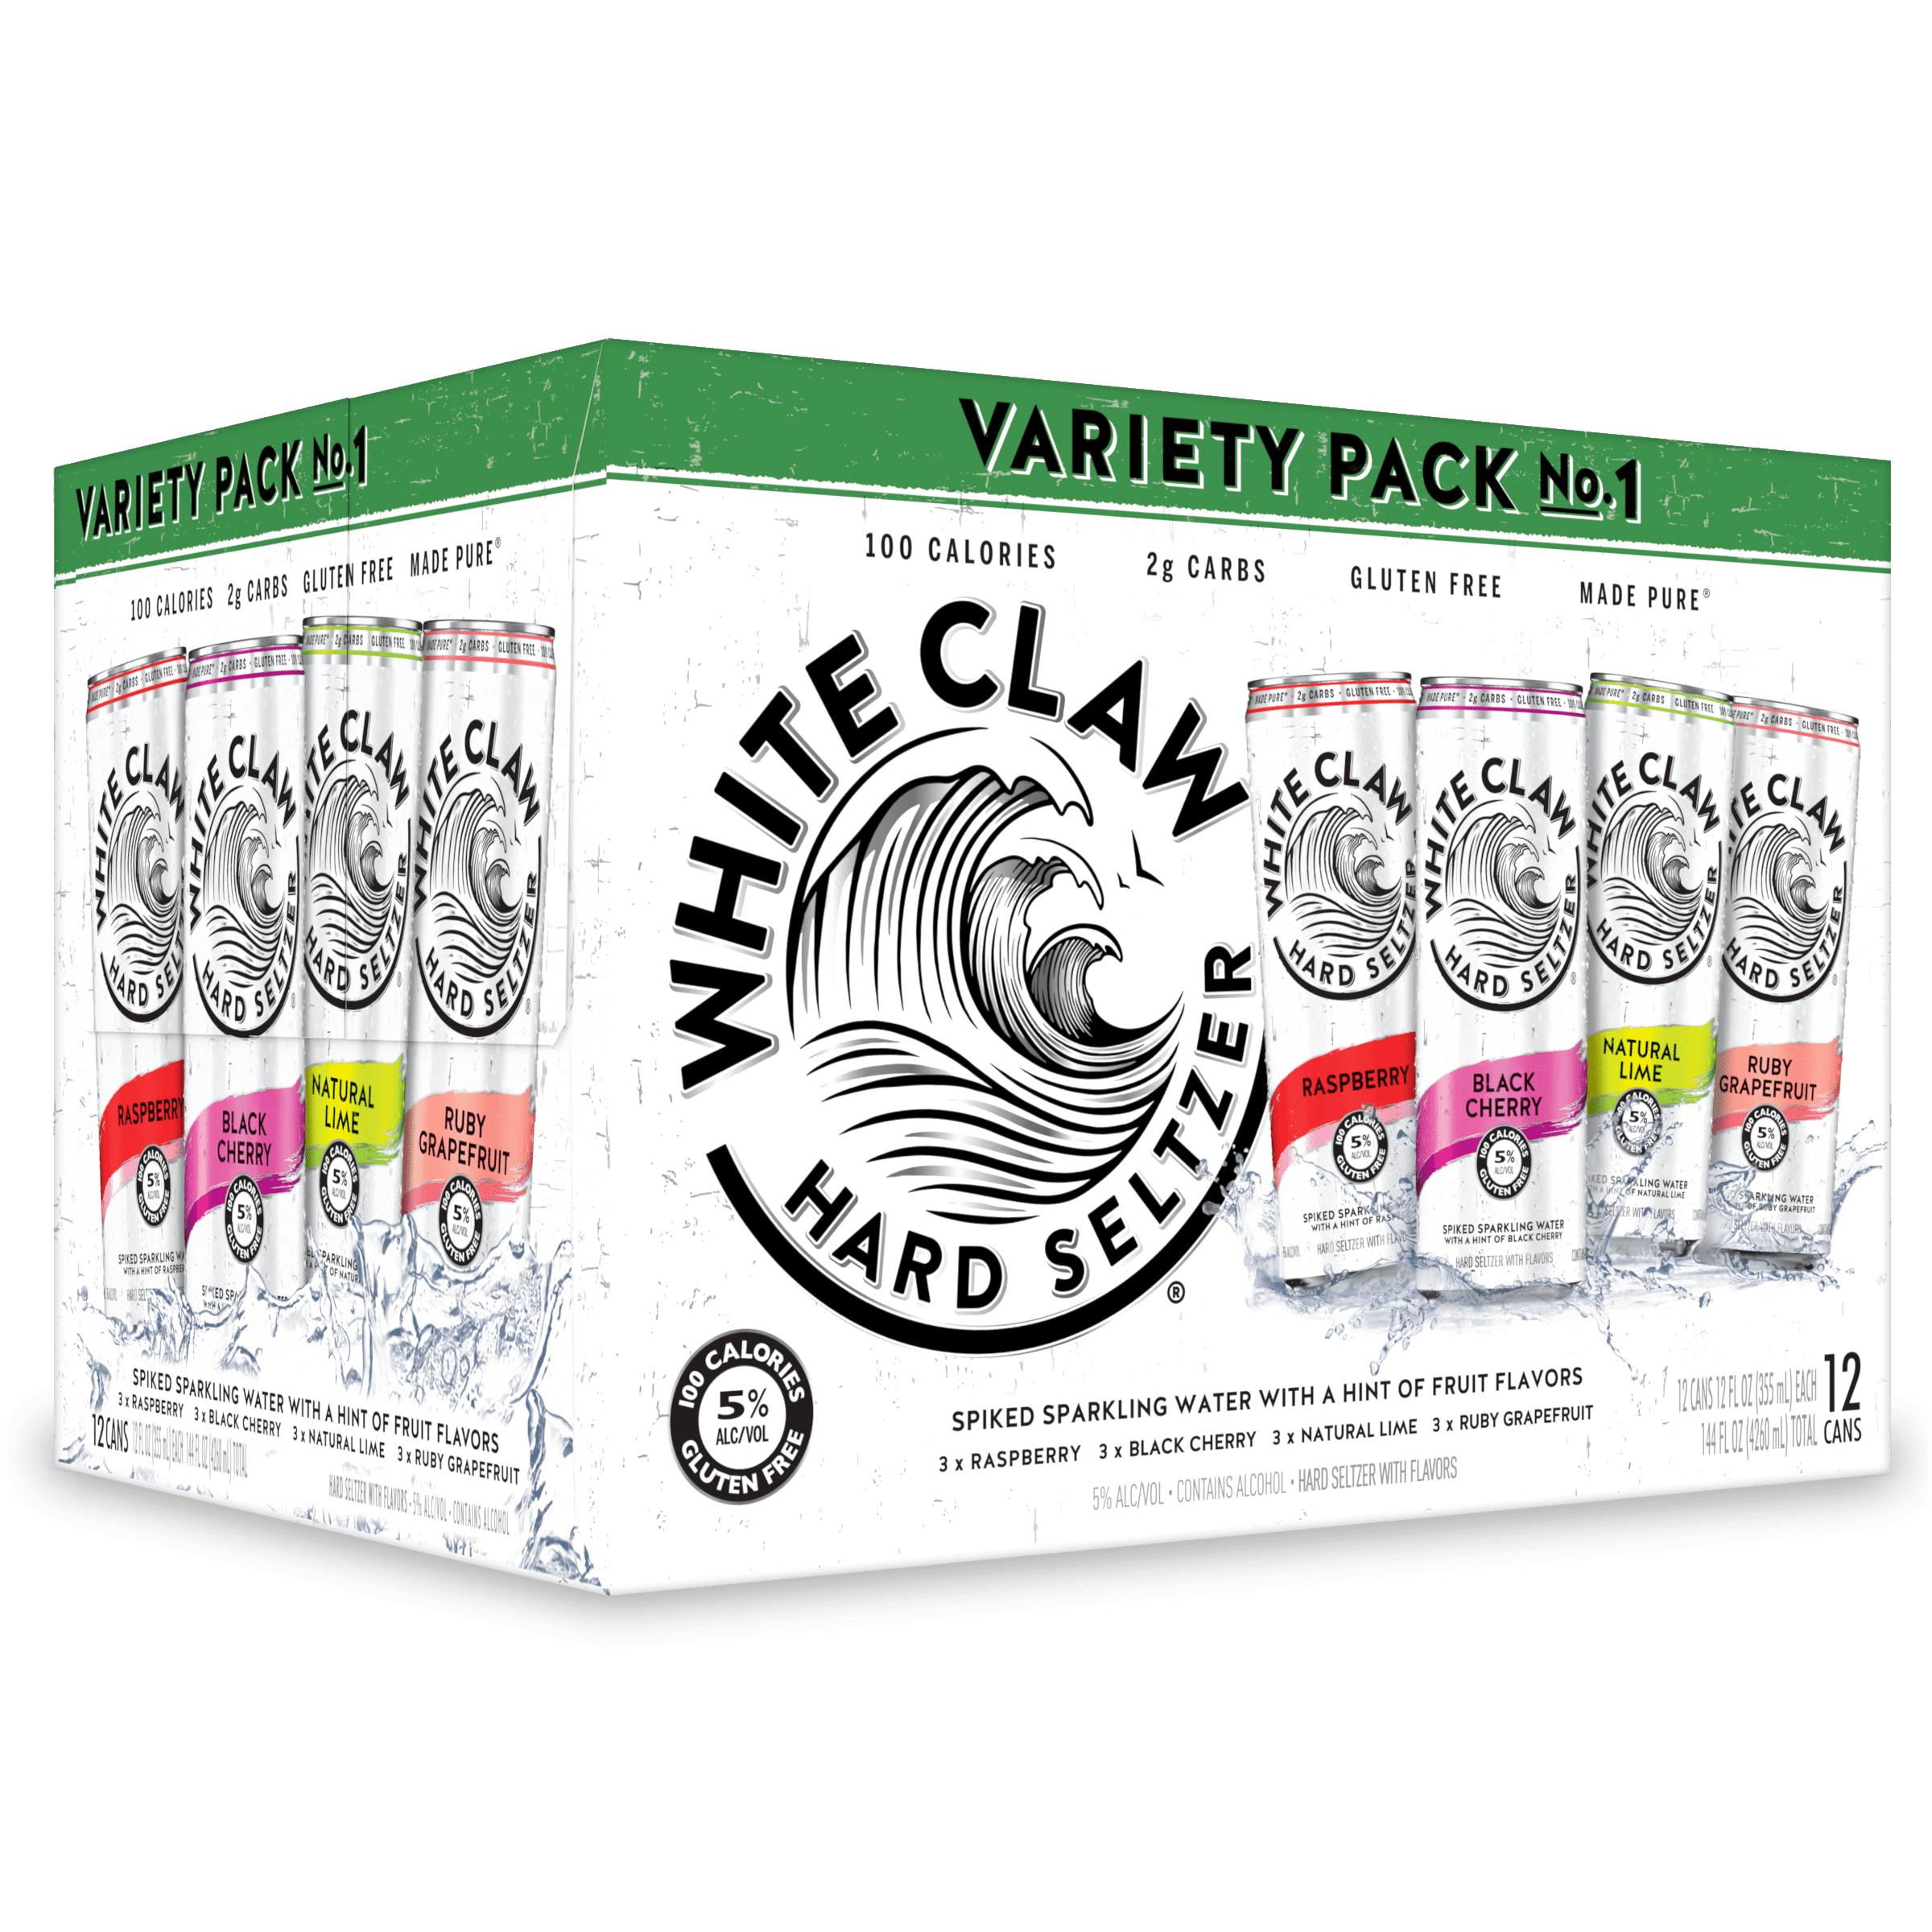 White Claw Hard Seltzer, Variety Pack NO. 1, 12 Pack, 12 fl oz Cans ...